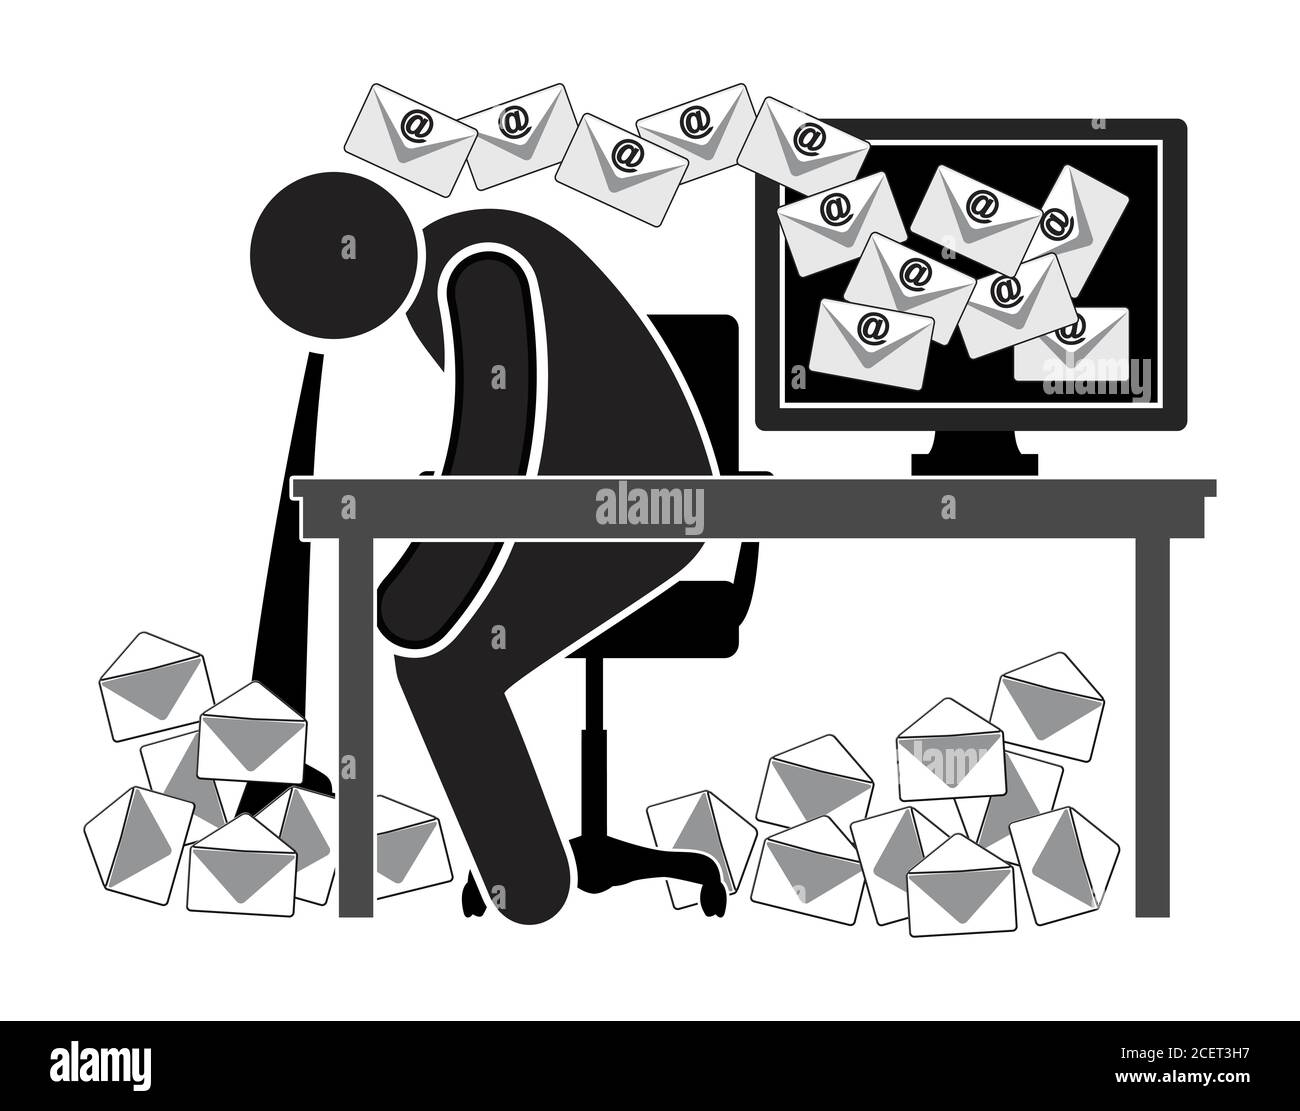 Caricature of sick office worker: health hazard for those who must deal with daily floods of messages. Stock Photo